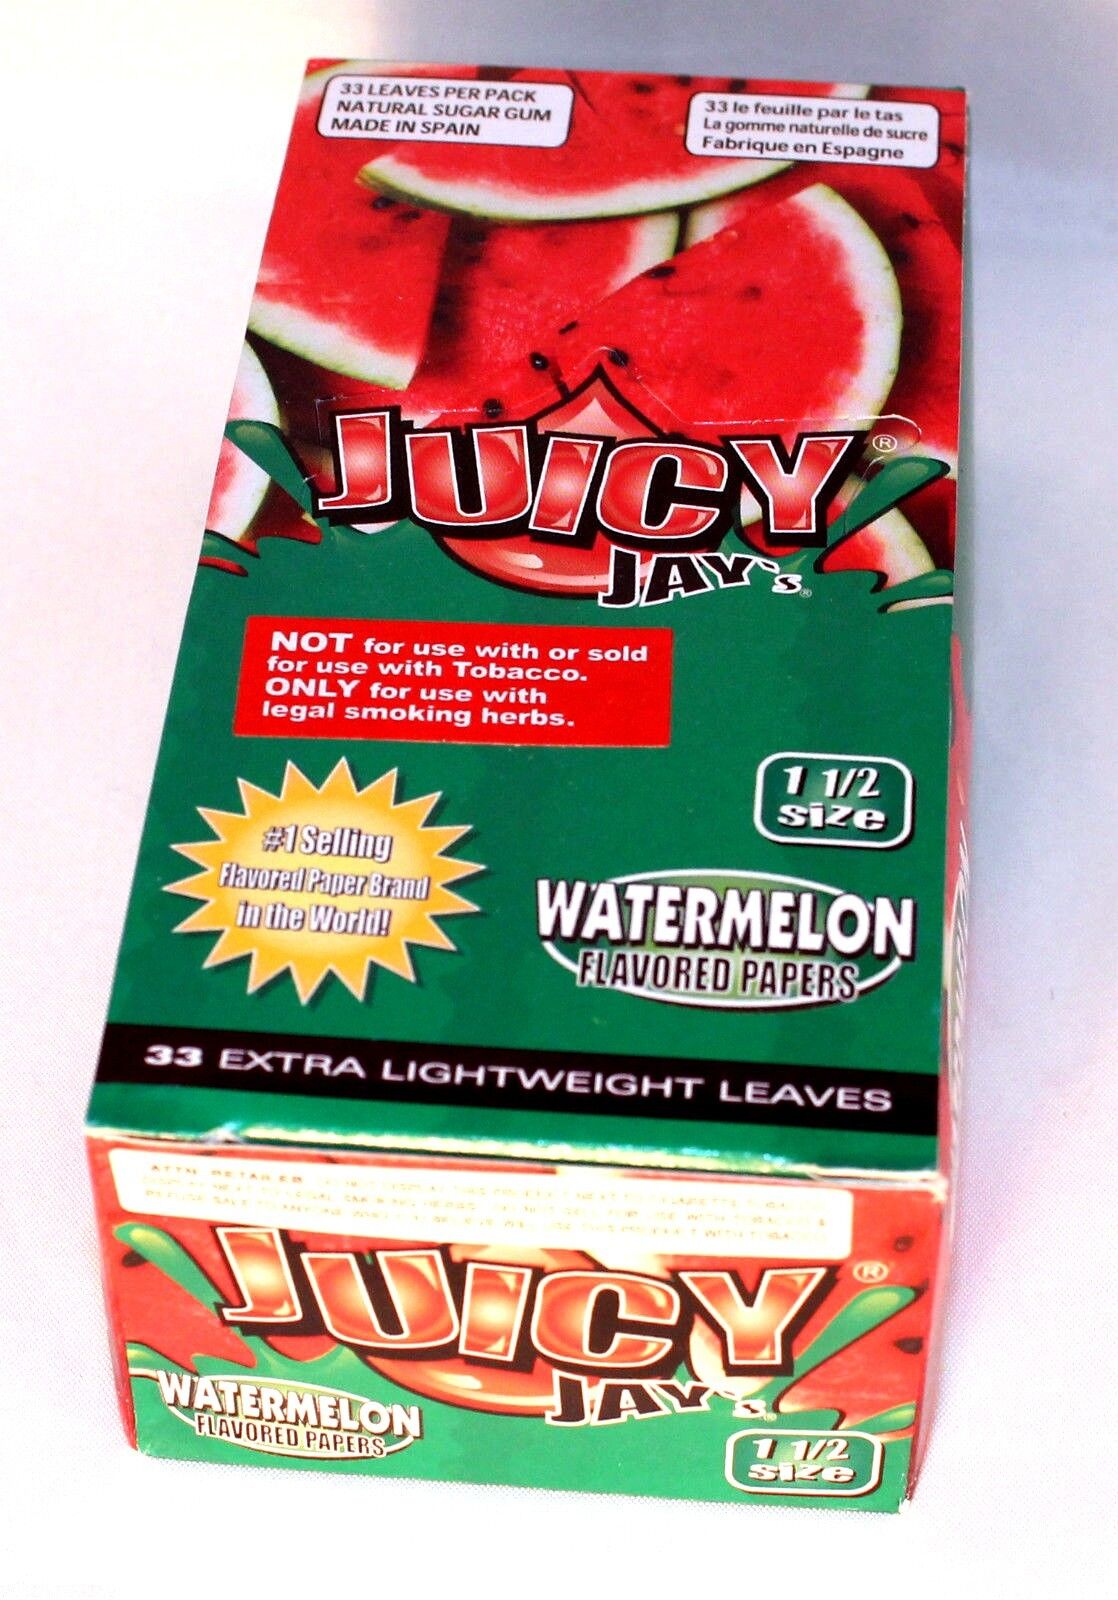 24 pack 1.5 size Juicy Jay's Watermelon Flavored Cigarette Rolling Papers 1 1/2 